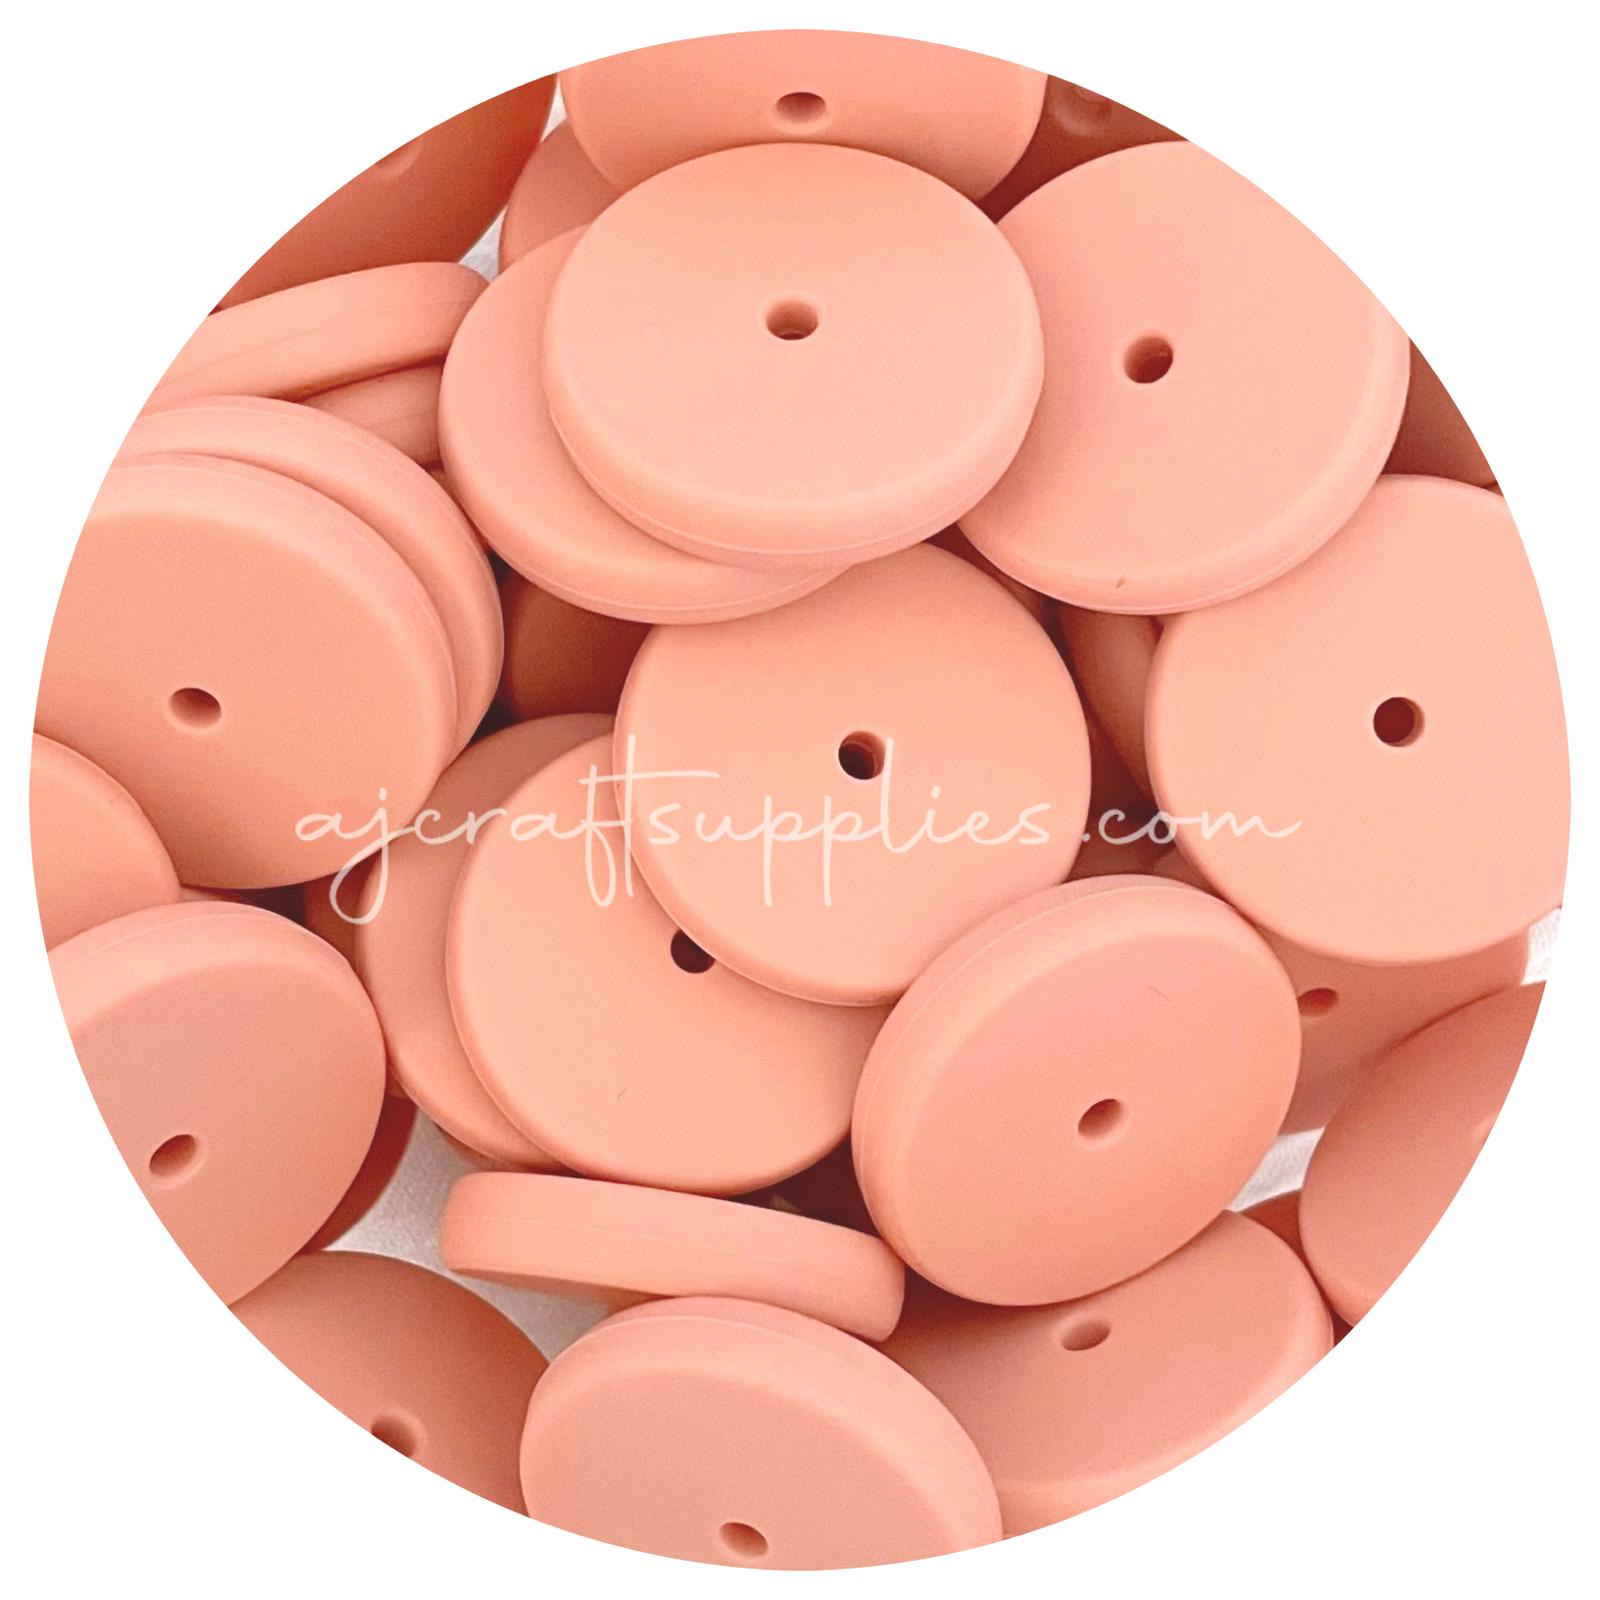 Peach - 25mm Flat Coin Silicone Beads - 5 beads